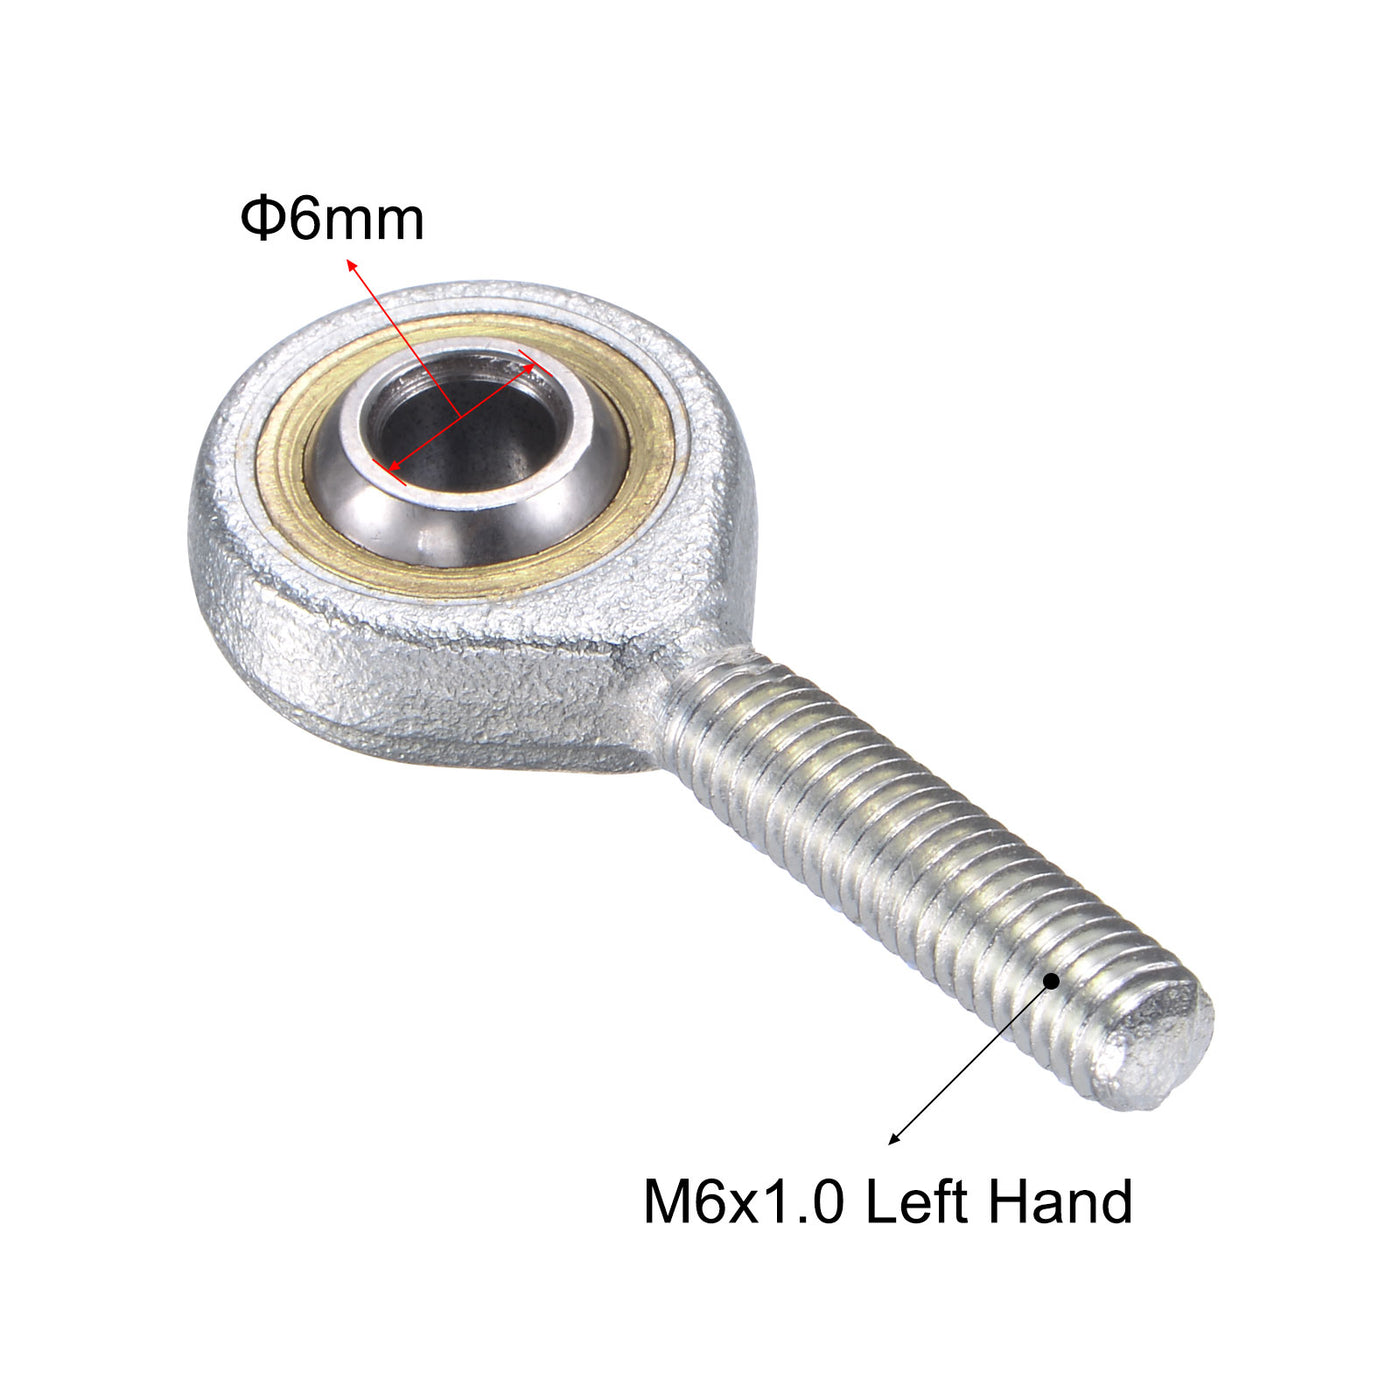 uxcell Uxcell SA25TK POSA25 Rod End Bearing 25mm Bore M25x2 Left Hand Male Thread